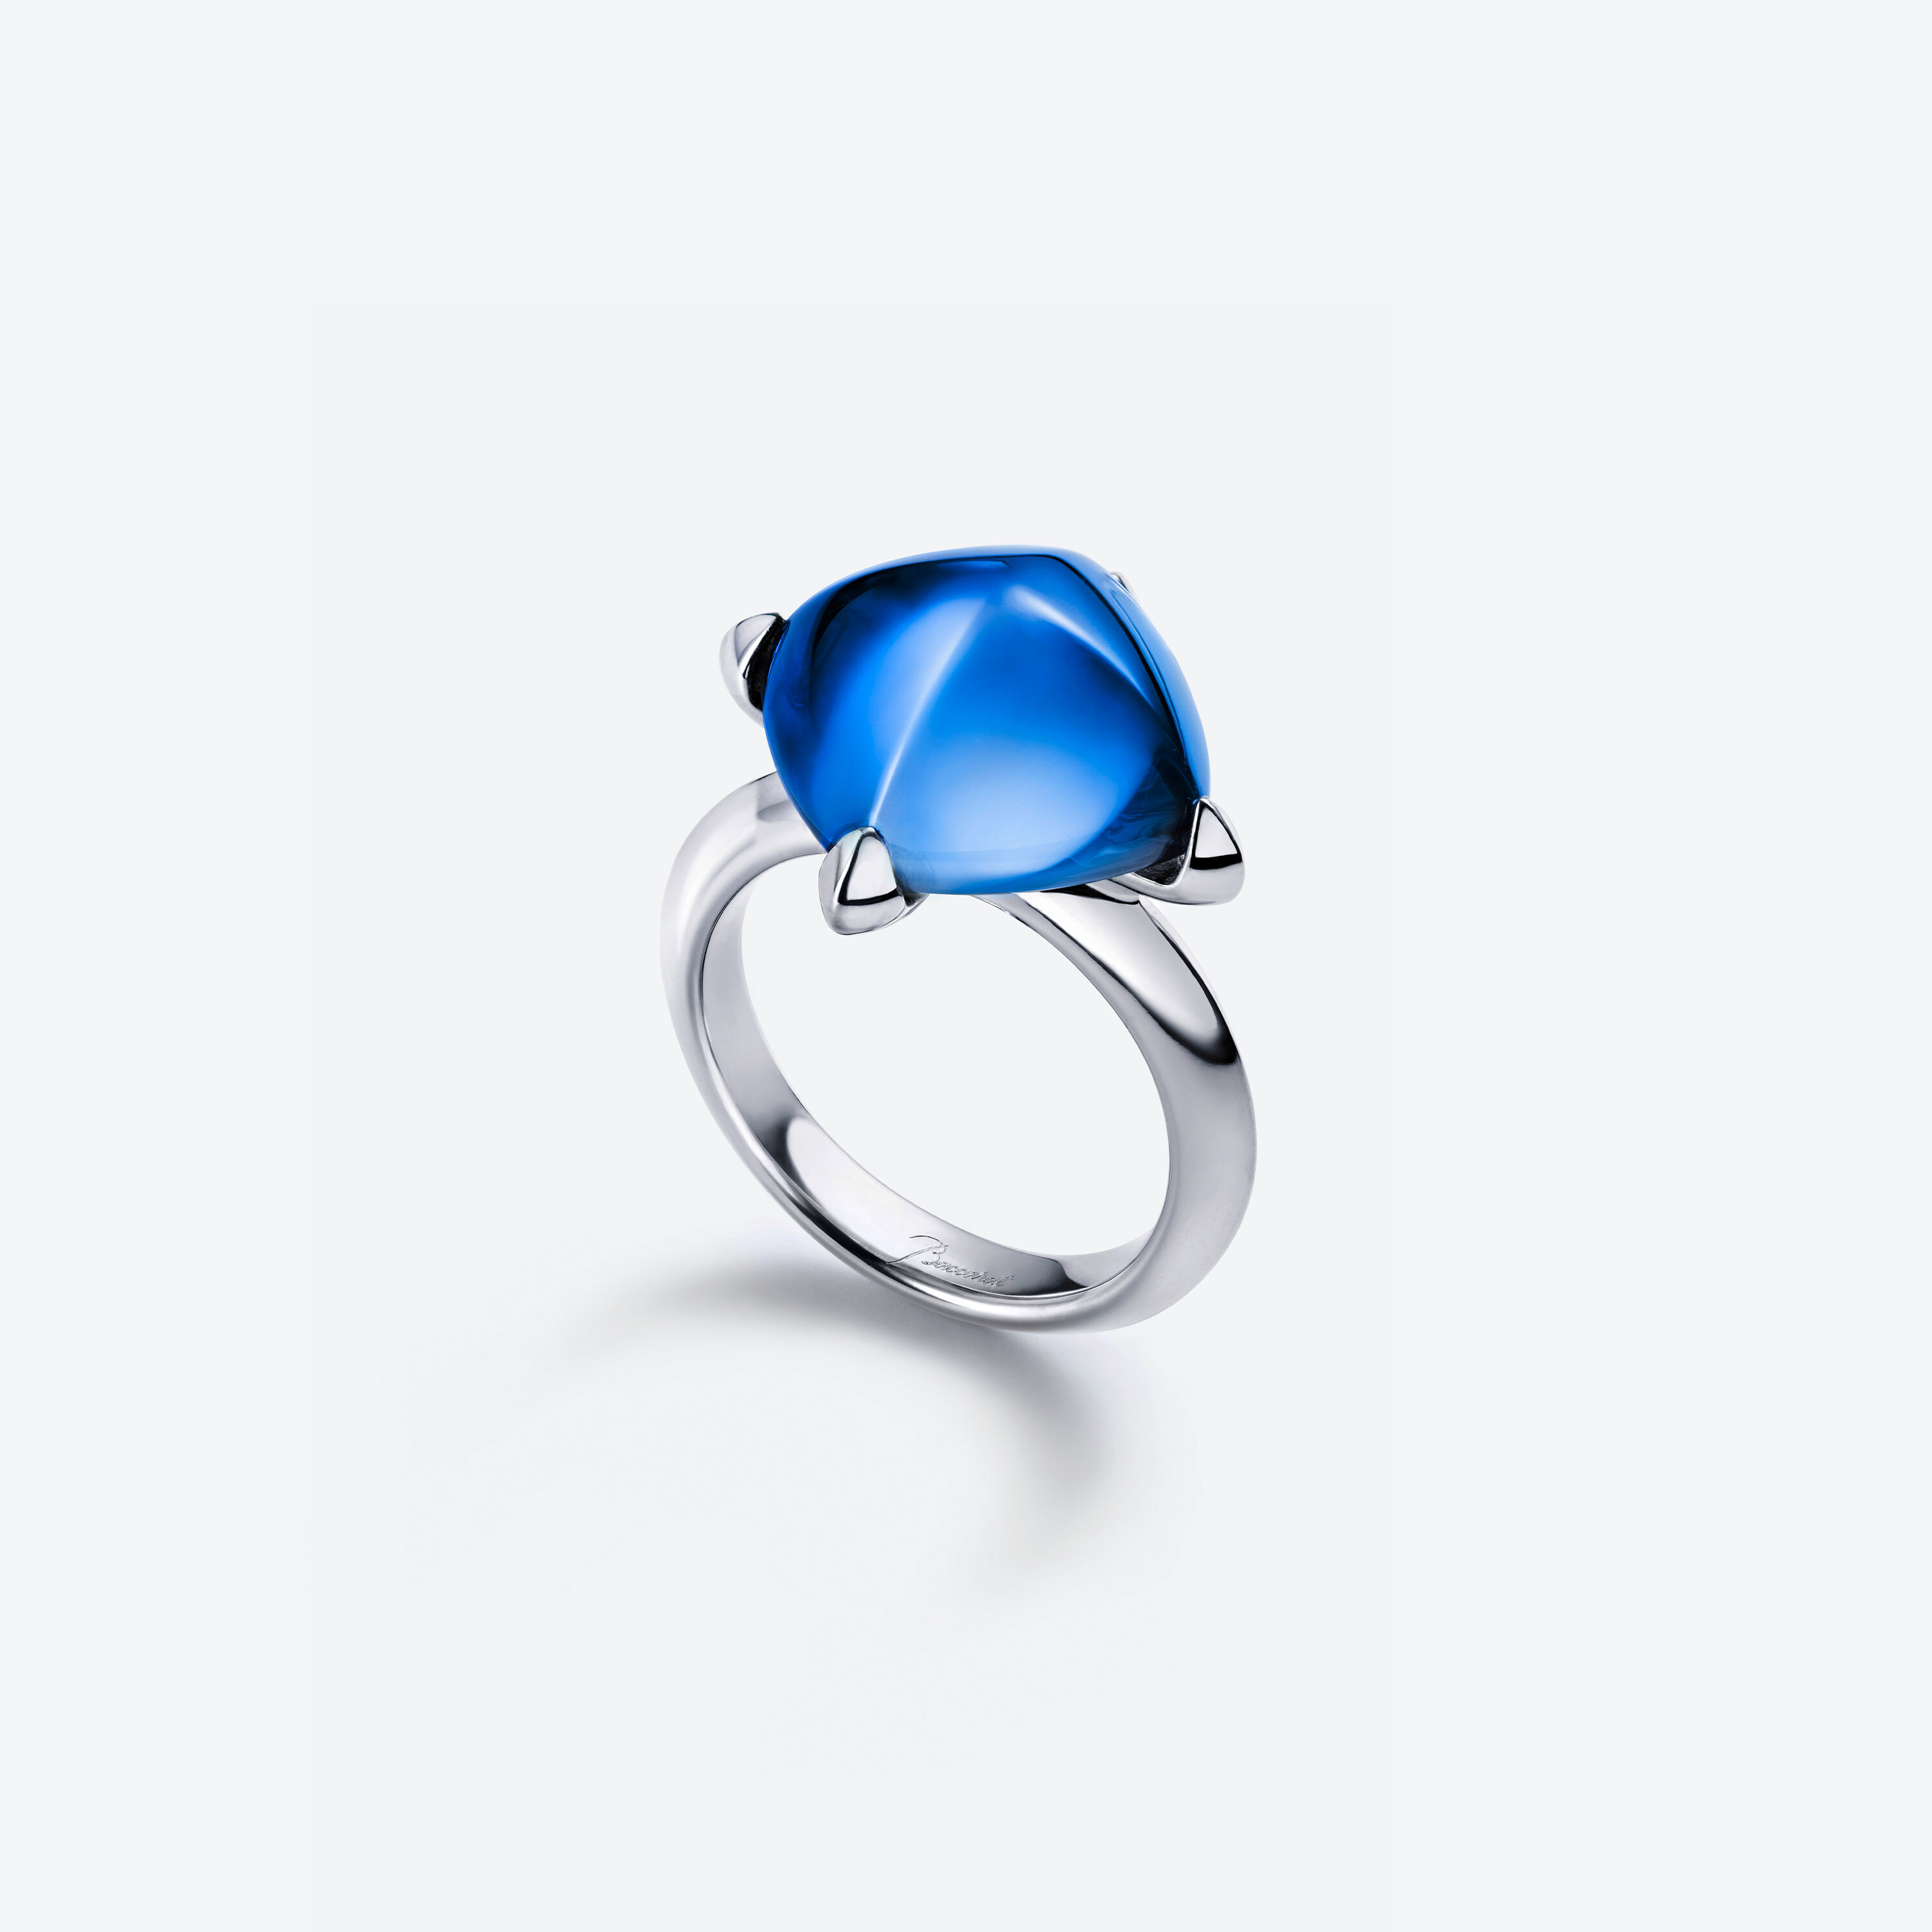 Rings | Baccarat United States